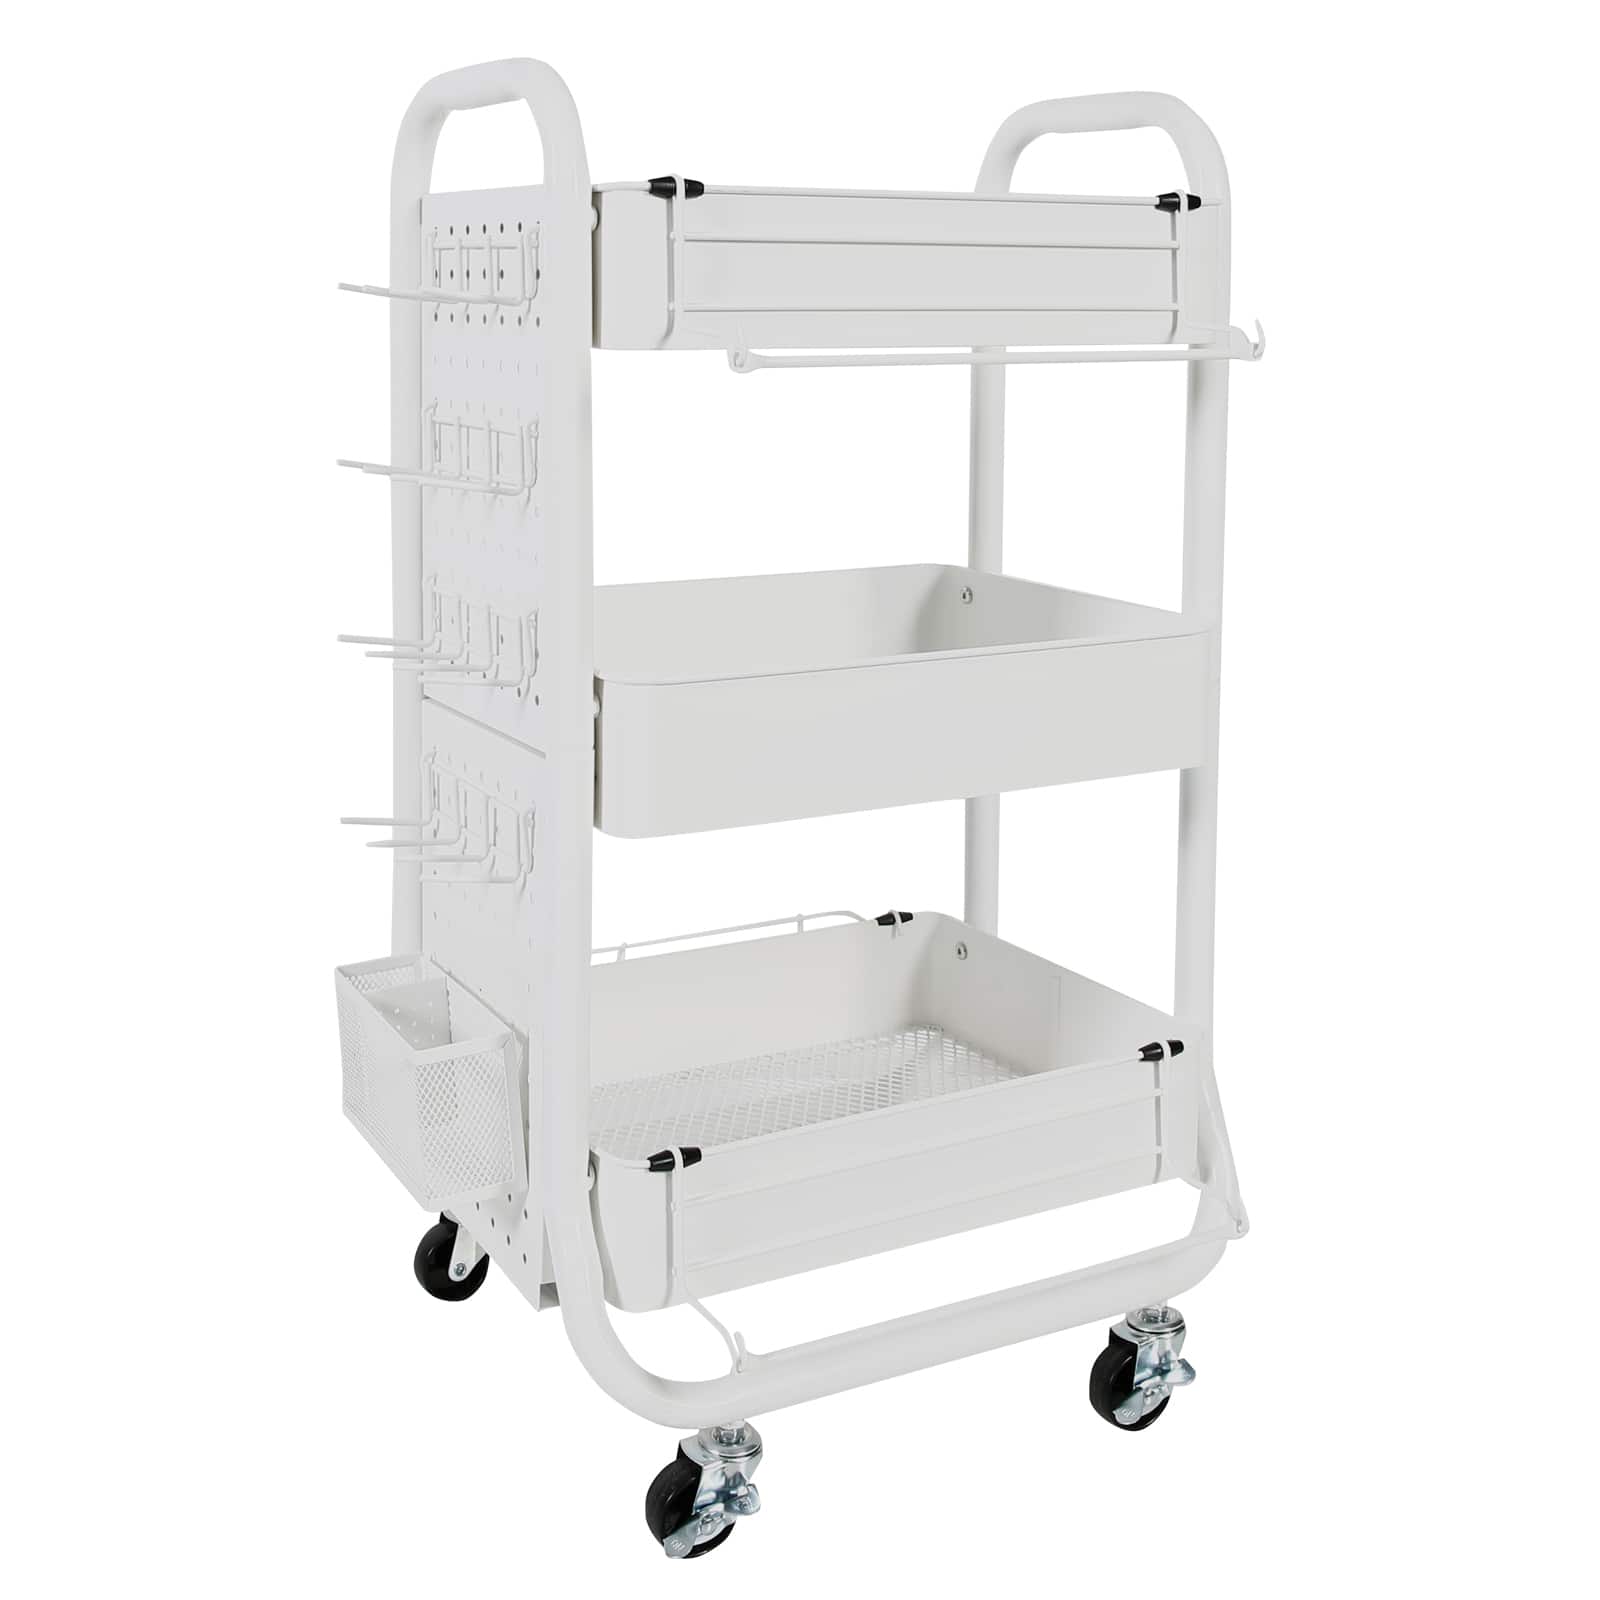 12 Pack: Gramercy Rolling Cart by Simply Tidy™